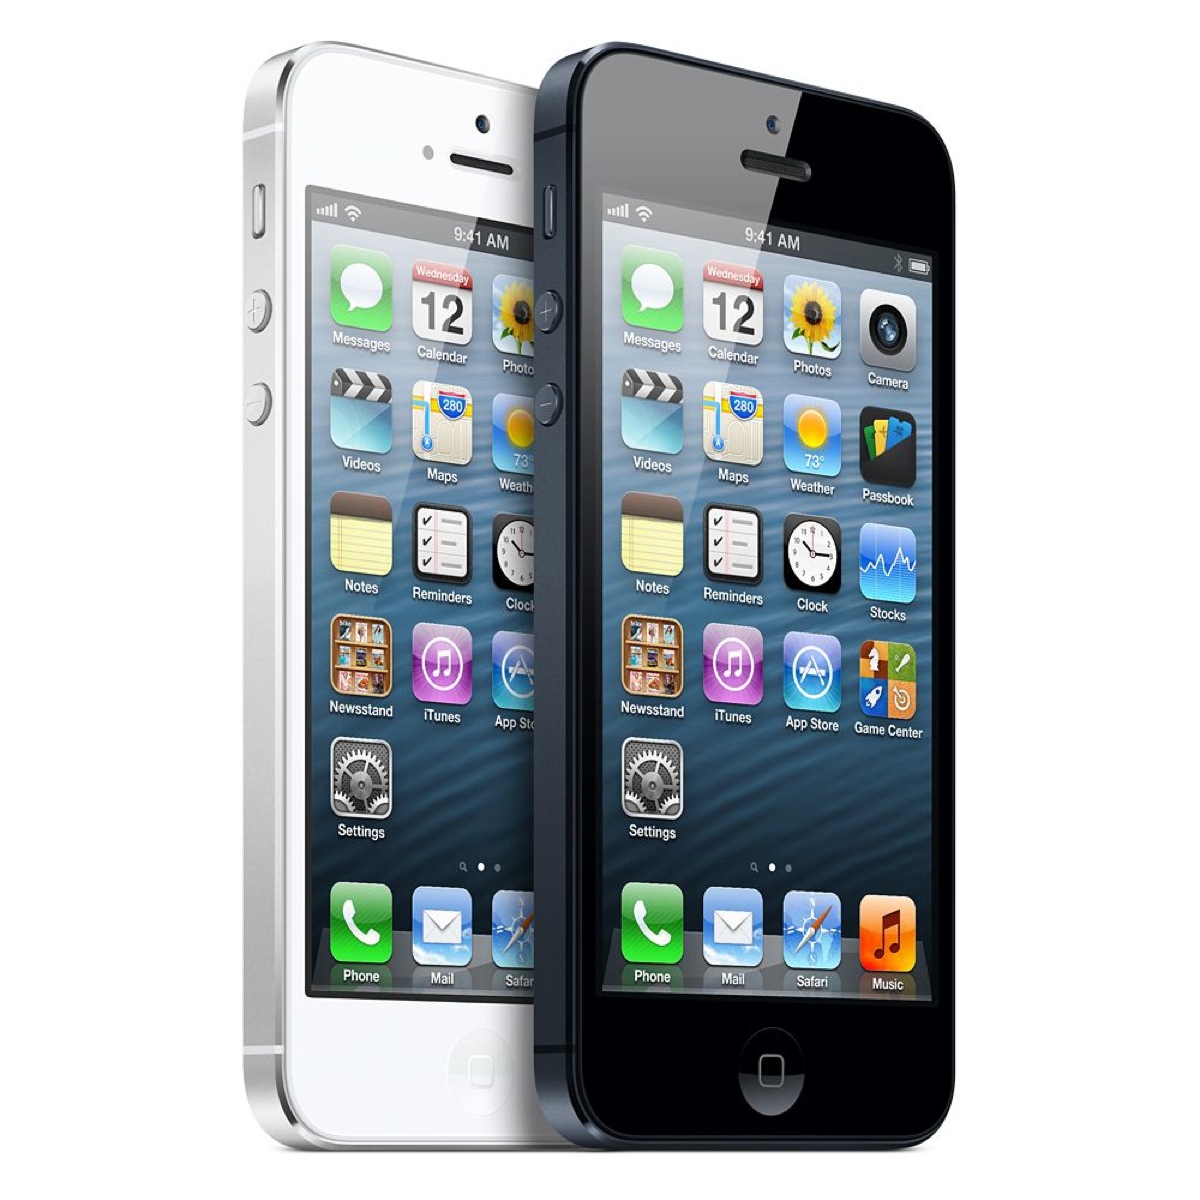 Apple Opens iPhone 5 Battery Replacement Program for